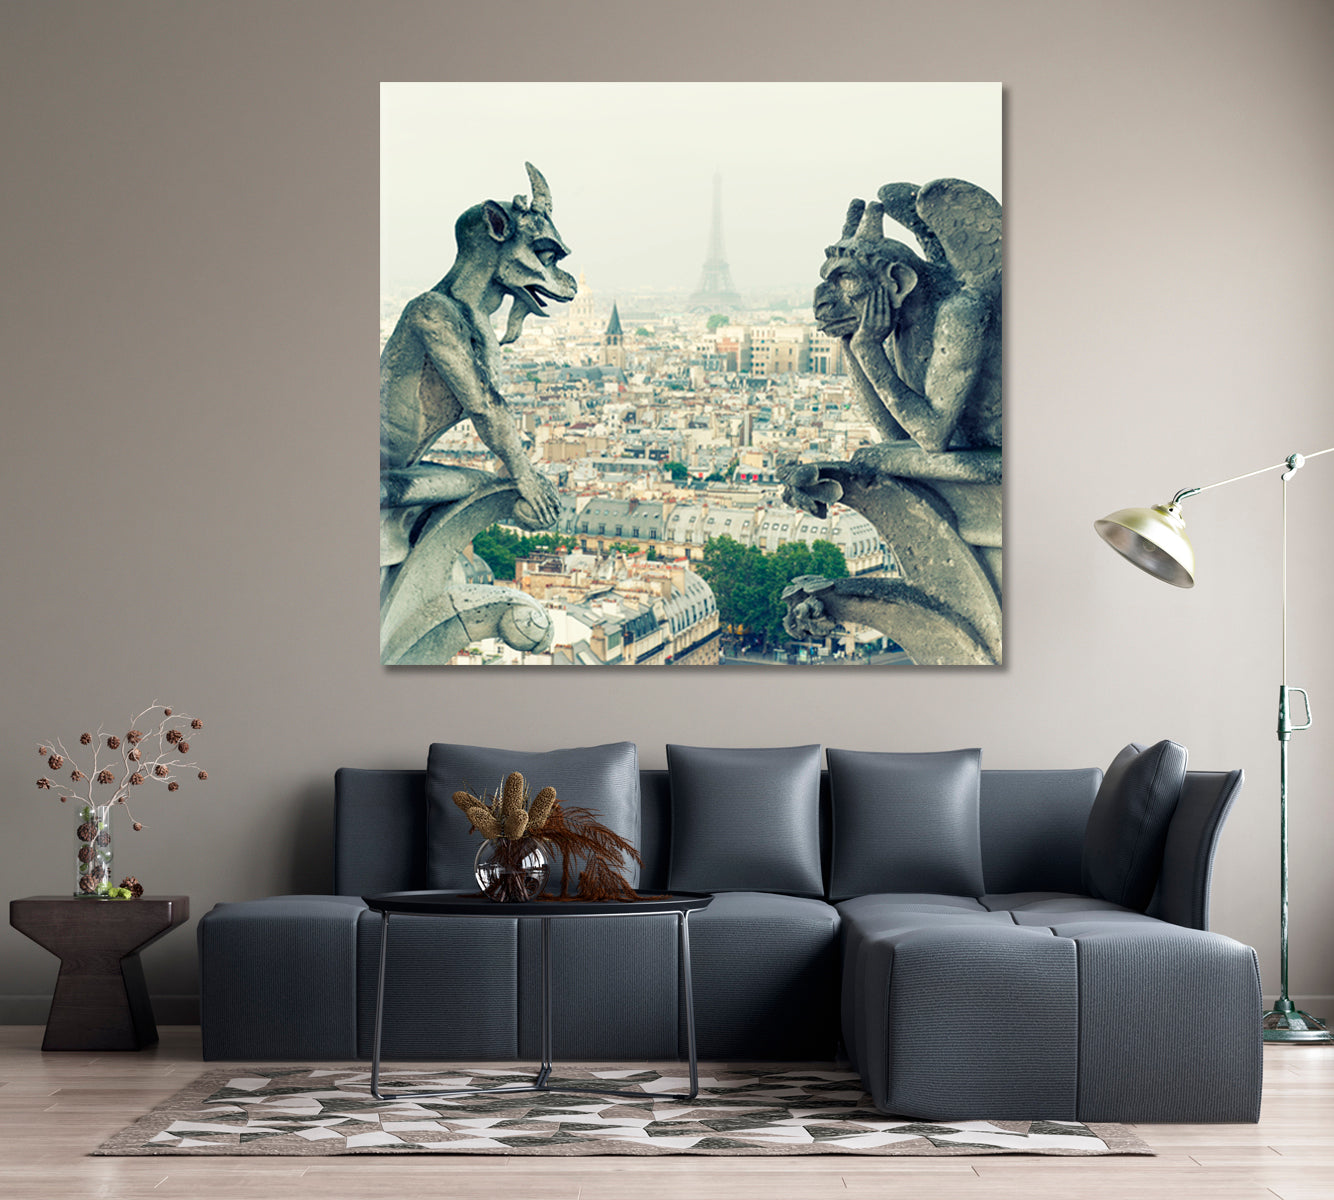 Gargoyle and Chimera from Notre Dame de Paris Vintage Style Canvas Print | Square Panel Cities Wall Art Artesty 1 Panel 12"x12" 